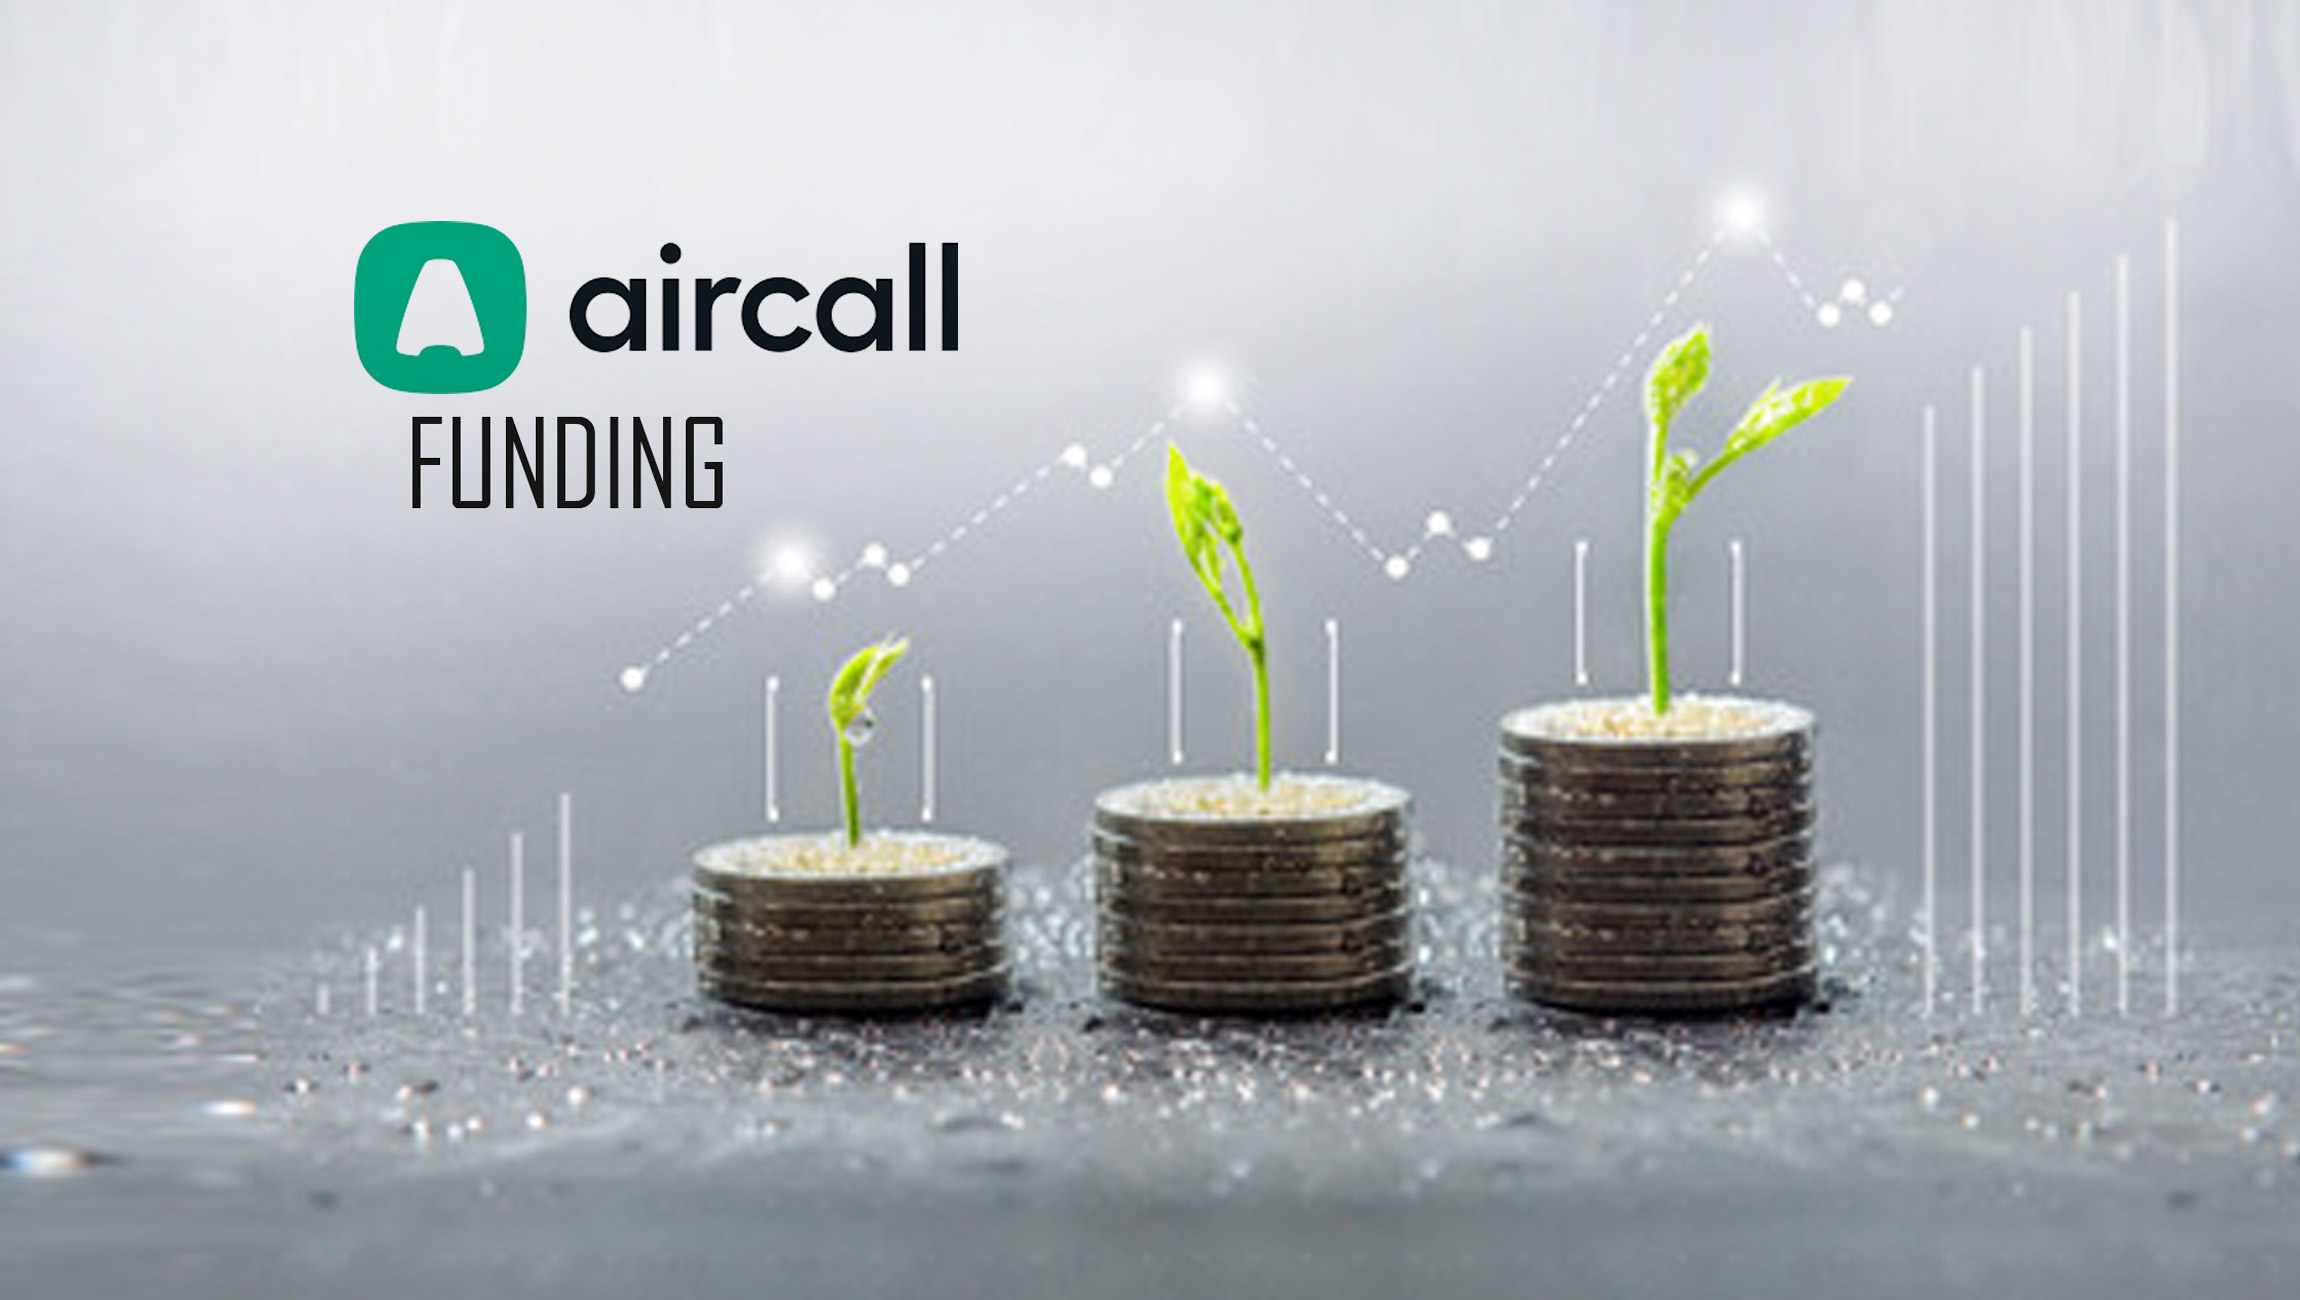 Aircall Exceeds $100 Million in Annual Recurring Revenue, and Reaches Centaur Status